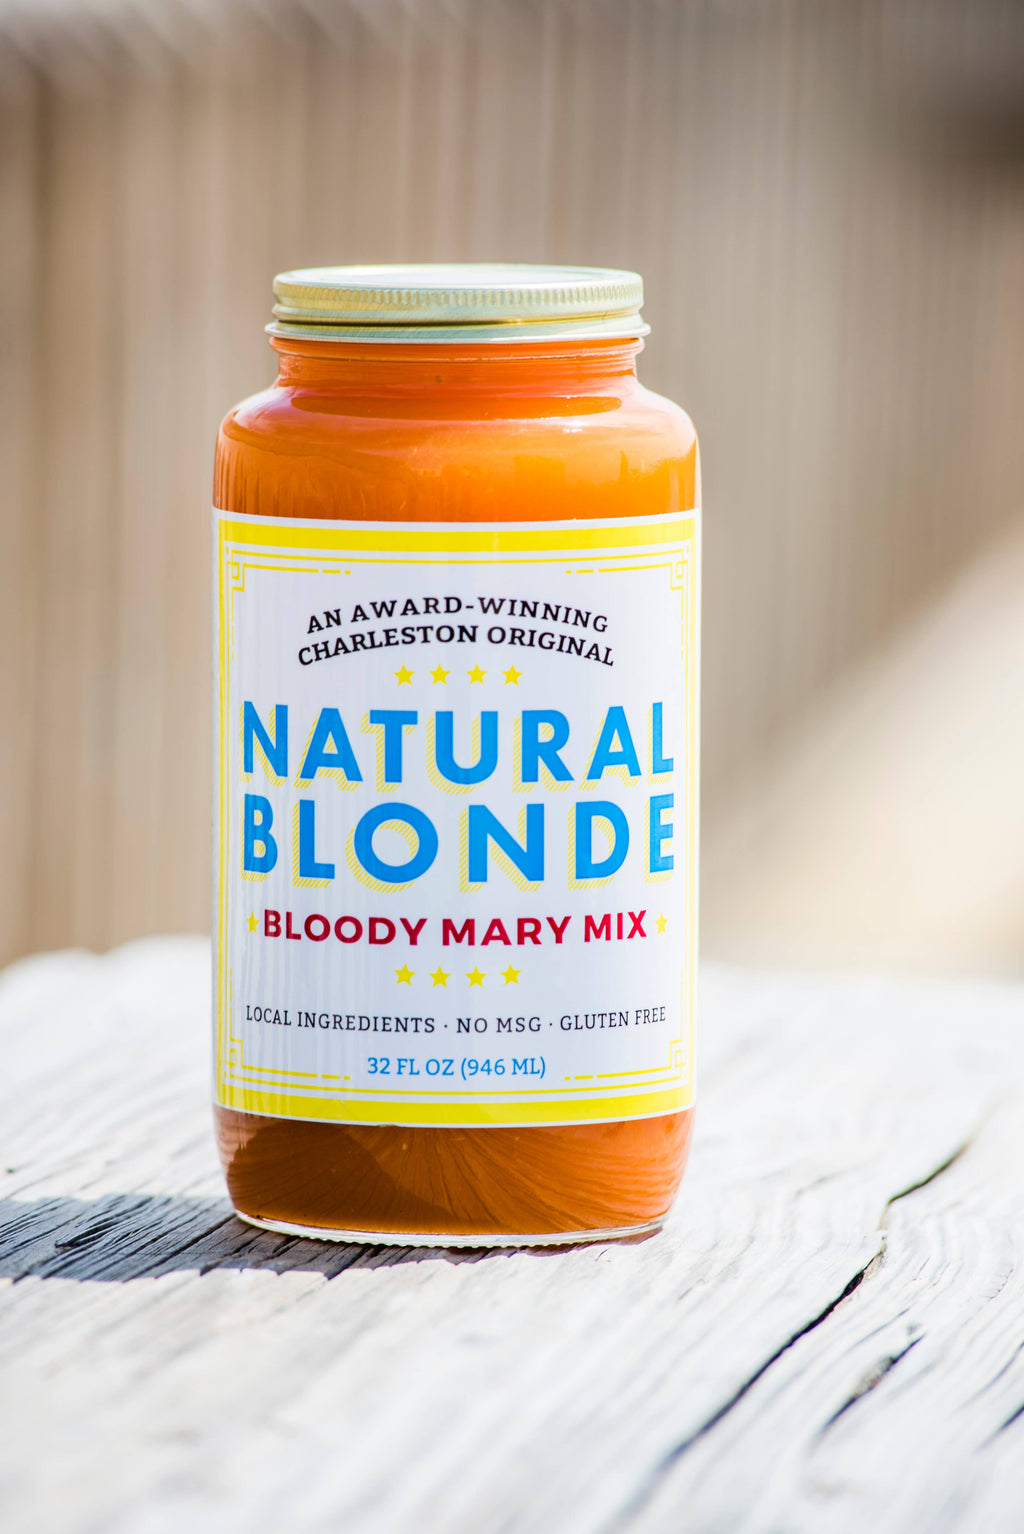 SALE! Natural Blonde - Bloody Mary Mix - 32oz Jar